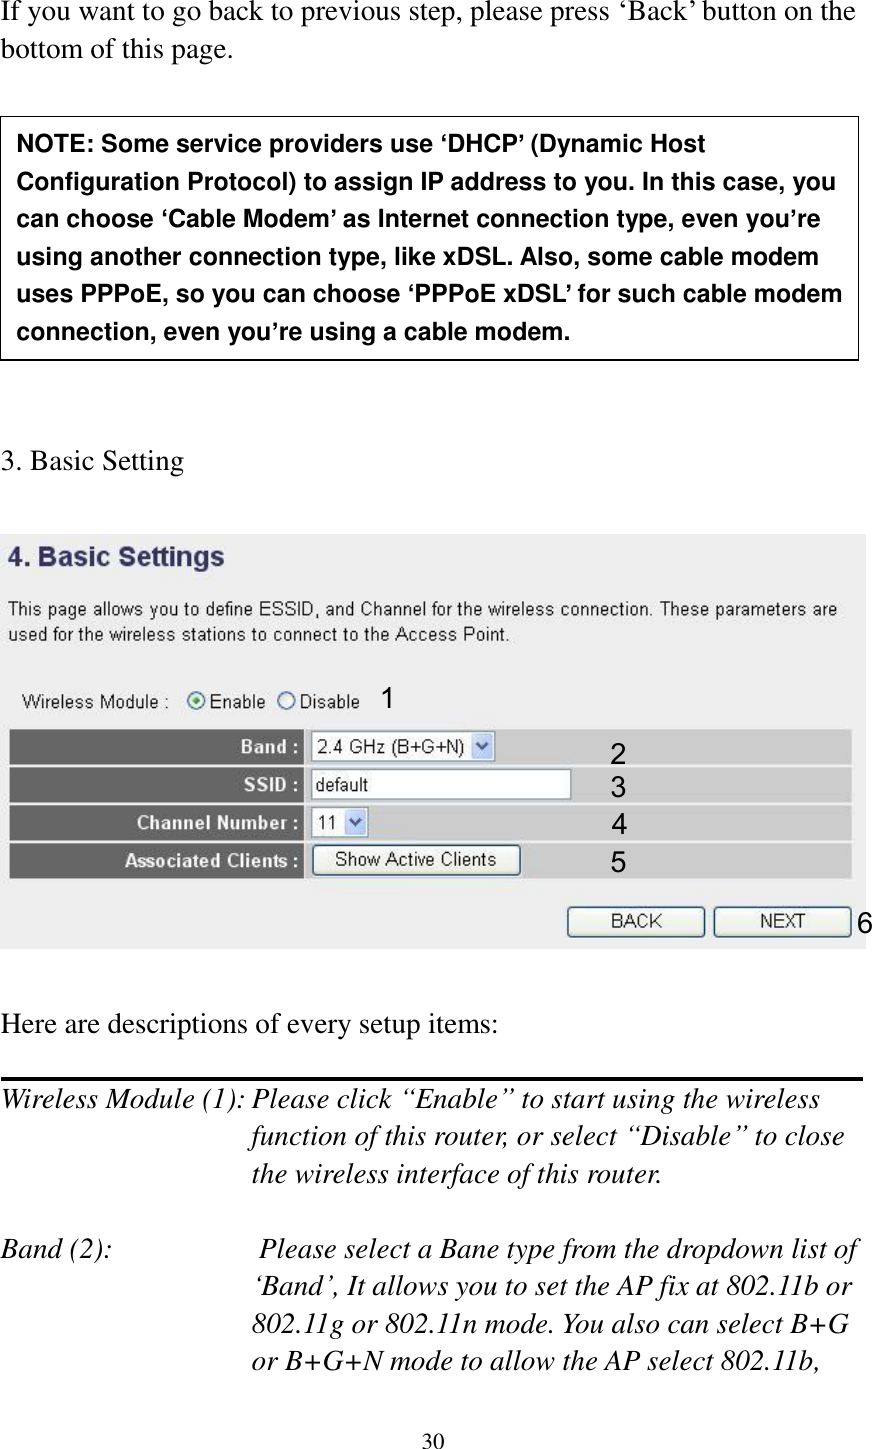 30  If you want to go back to previous step, please press „Back‟ button on the bottom of this page.           3. Basic Setting    Here are descriptions of every setup items:  Wireless Module (1): Please click “Enable” to start using the wireless function of this router, or select “Disable” to close the wireless interface of this router.  Band (2):                    Please select a Bane type from the dropdown list of „Band‟, It allows you to set the AP fix at 802.11b or 802.11g or 802.11n mode. You also can select B+G or B+G+N mode to allow the AP select 802.11b, NOTE: Some service providers use ‘DHCP’ (Dynamic Host Configuration Protocol) to assign IP address to you. In this case, you can choose ‘Cable Modem’ as Internet connection type, even you’re using another connection type, like xDSL. Also, some cable modem uses PPPoE, so you can choose ‘PPPoE xDSL’ for such cable modem connection, even you’re using a cable modem. 1 2 3 4 5 6 